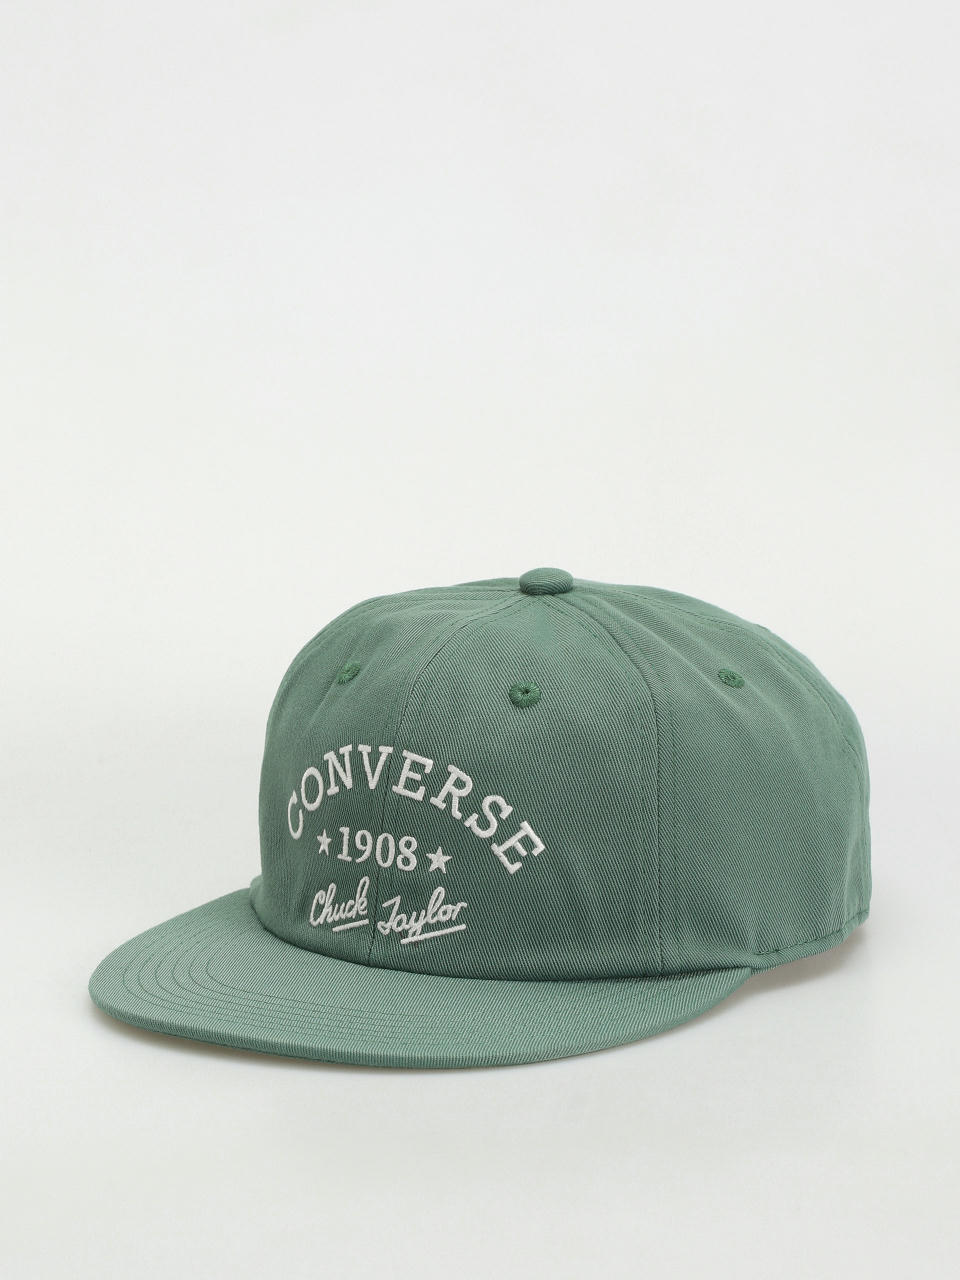 Converse Admiral Cap (forest/olive)